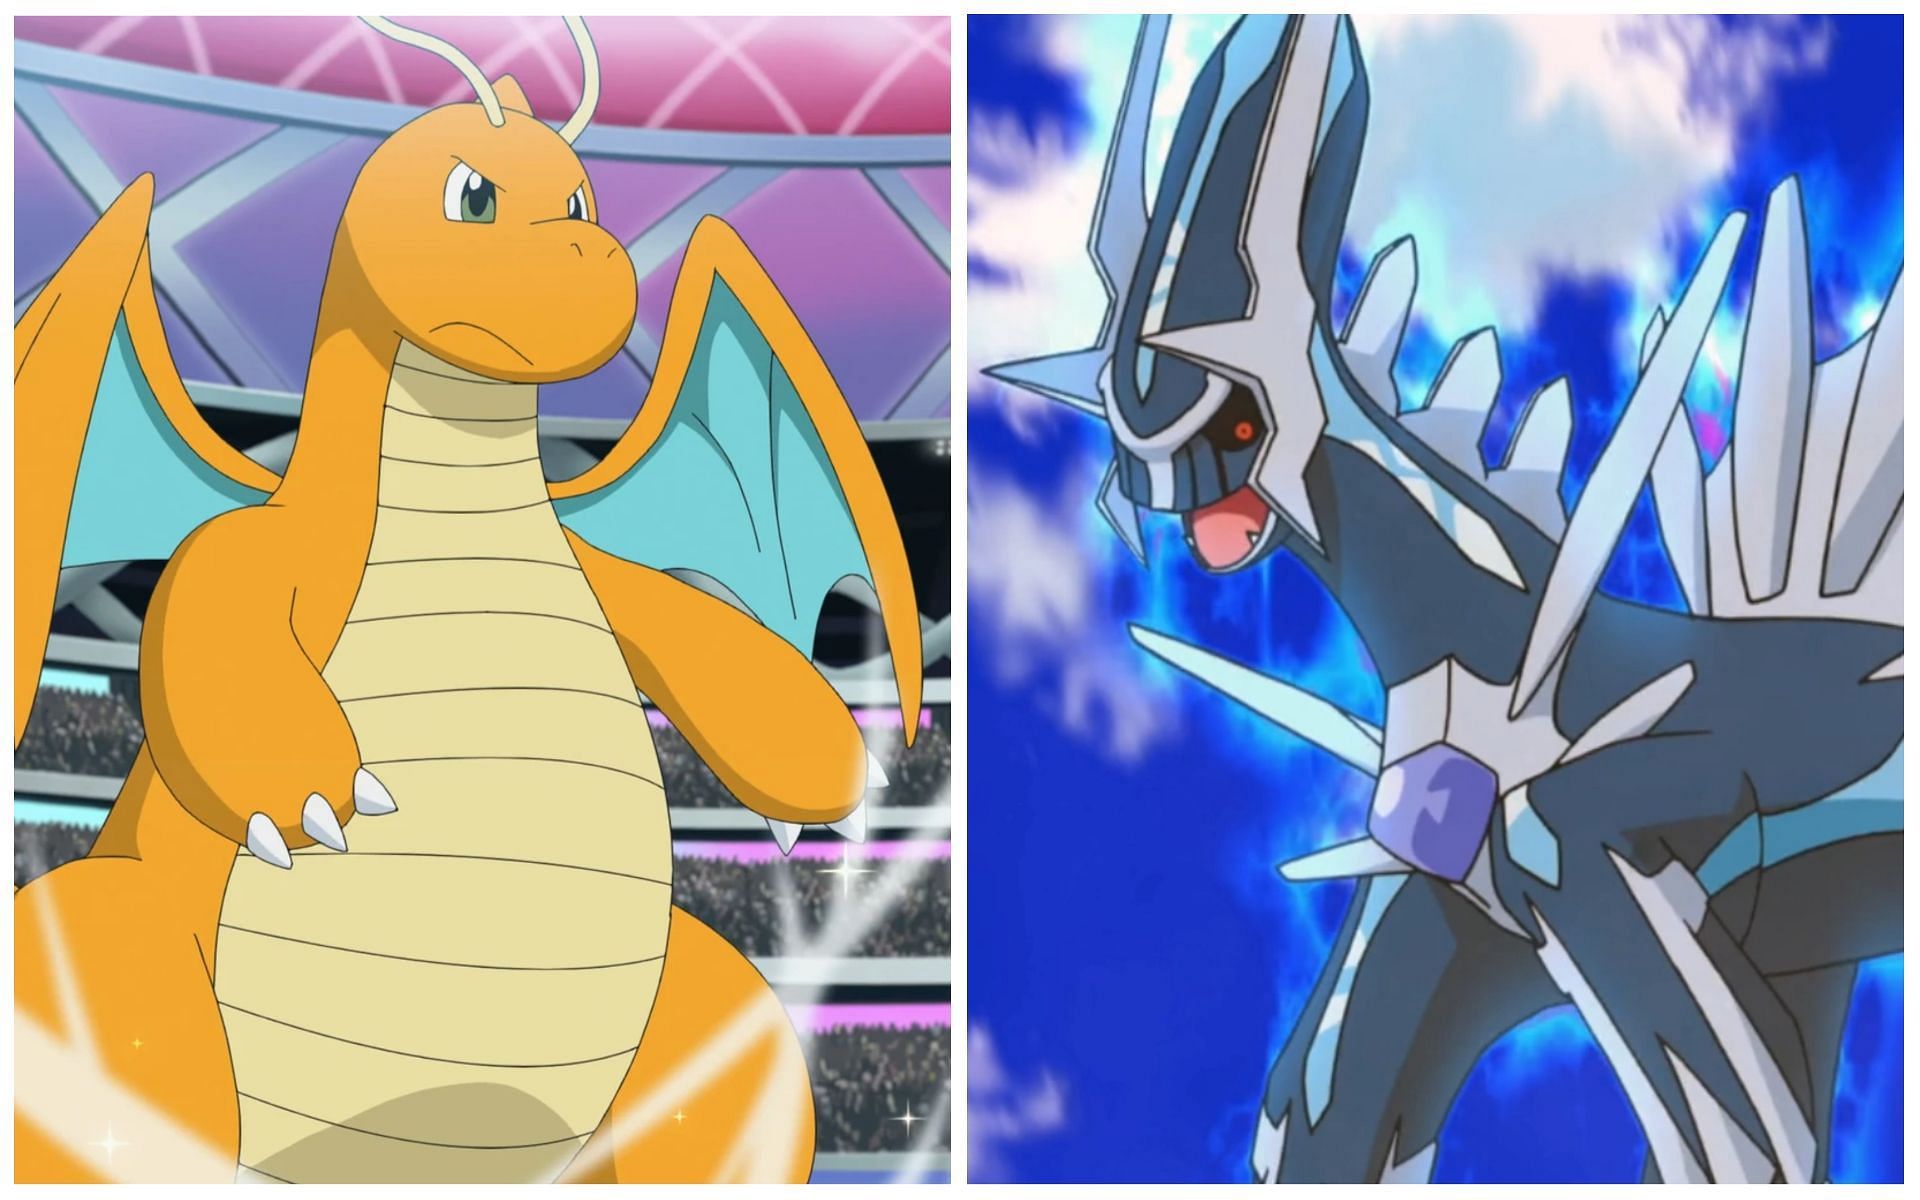 Dragon-type Pokemon are some of the most powerful creatures in the franchise (Image via The Pokemon Company)